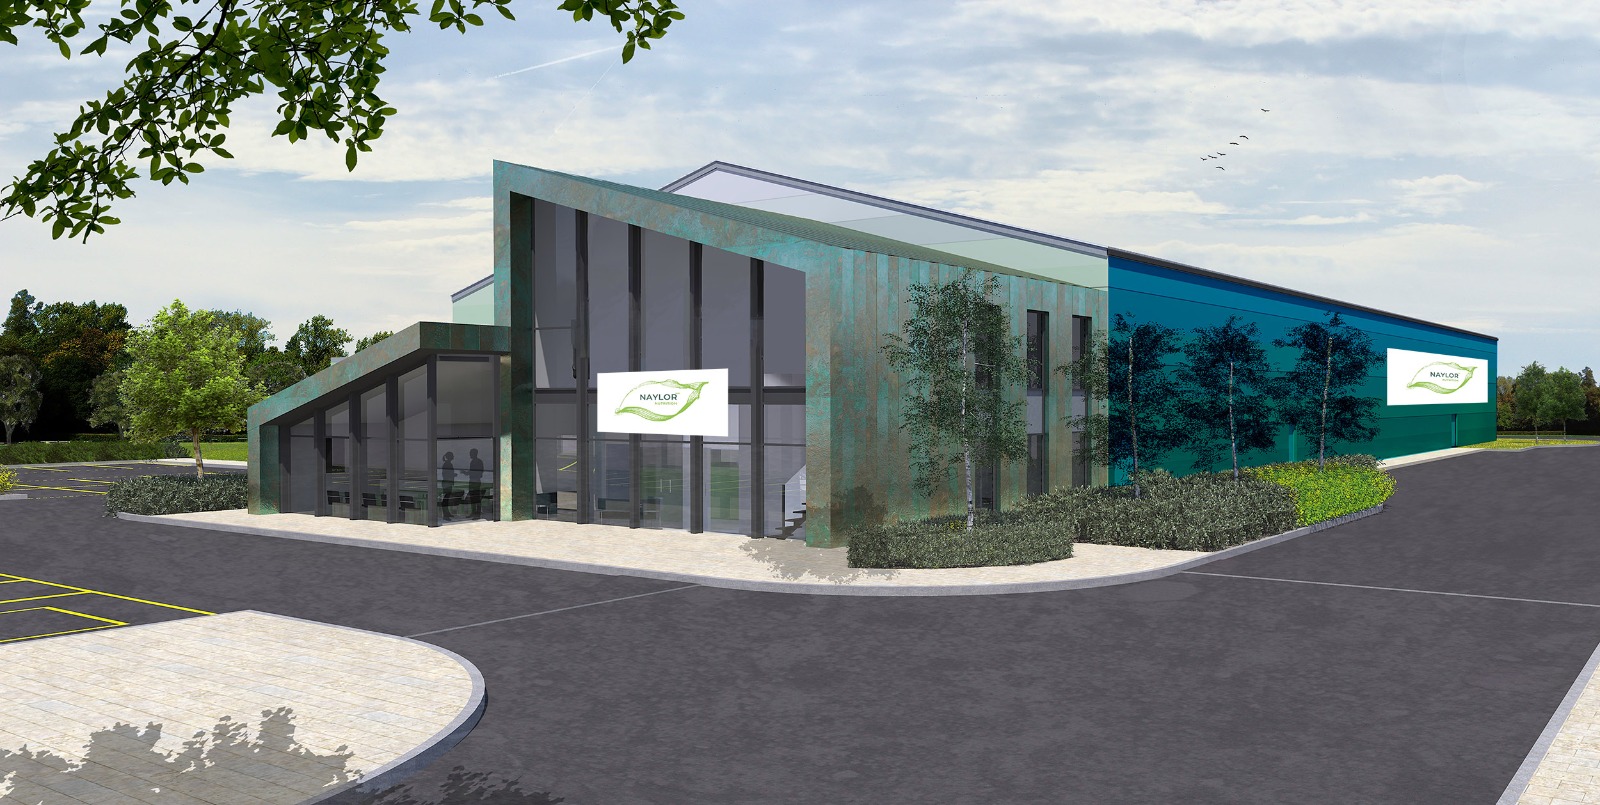 The new factory will be built on Naylor Farms land in Low Fulney Farm in Rangall Gate, Spalding